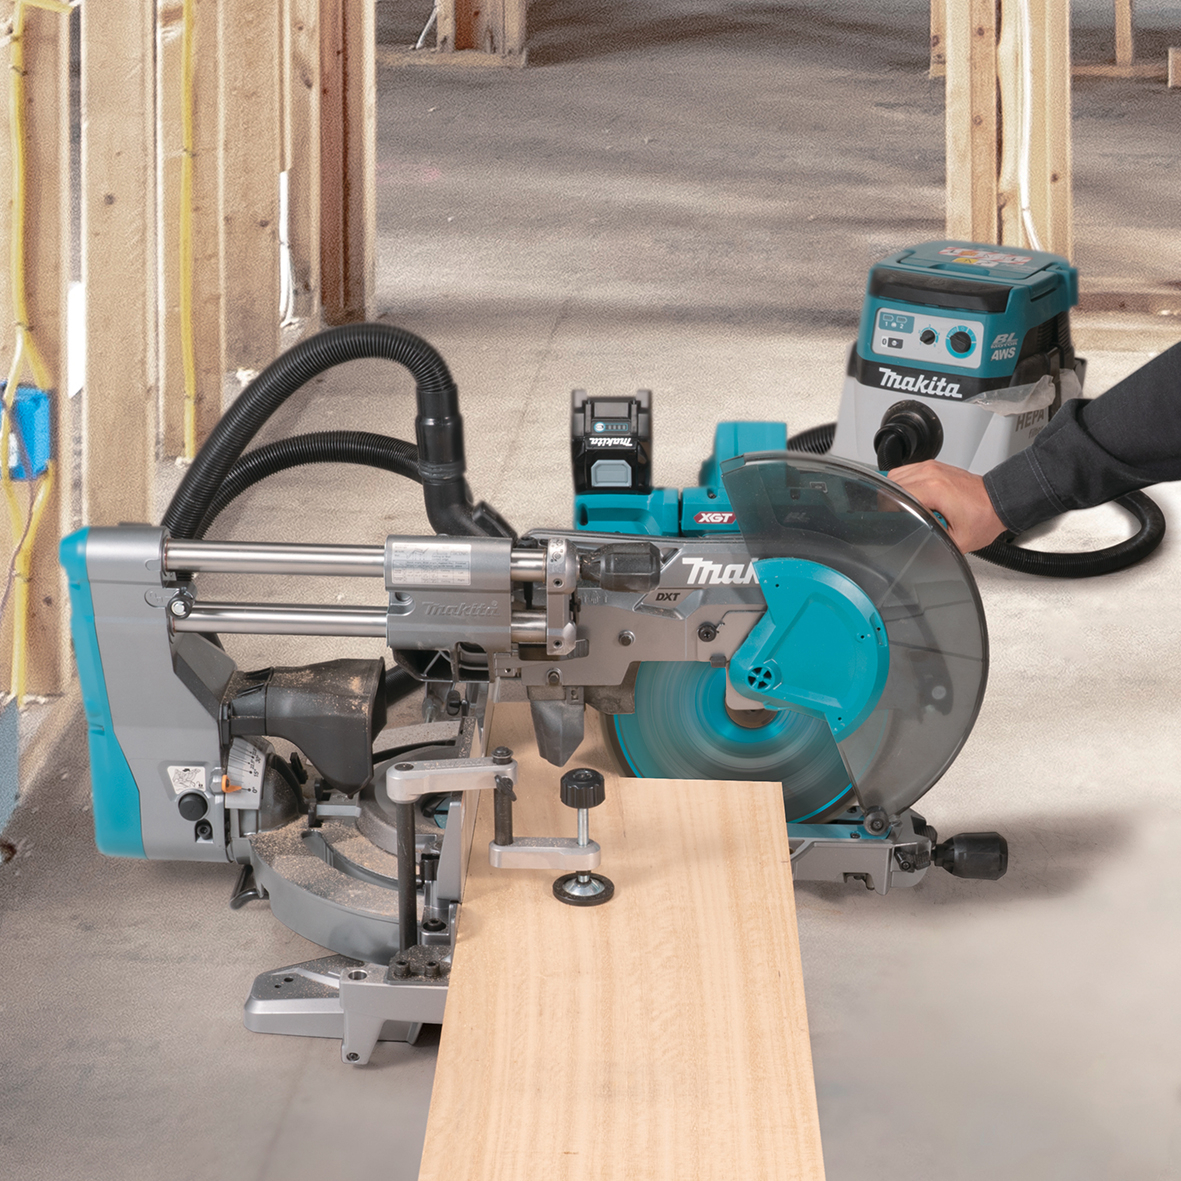 Makita 40V Max Brushless 305mm (12") Slide Compound Saw (tool only) LS003GZ